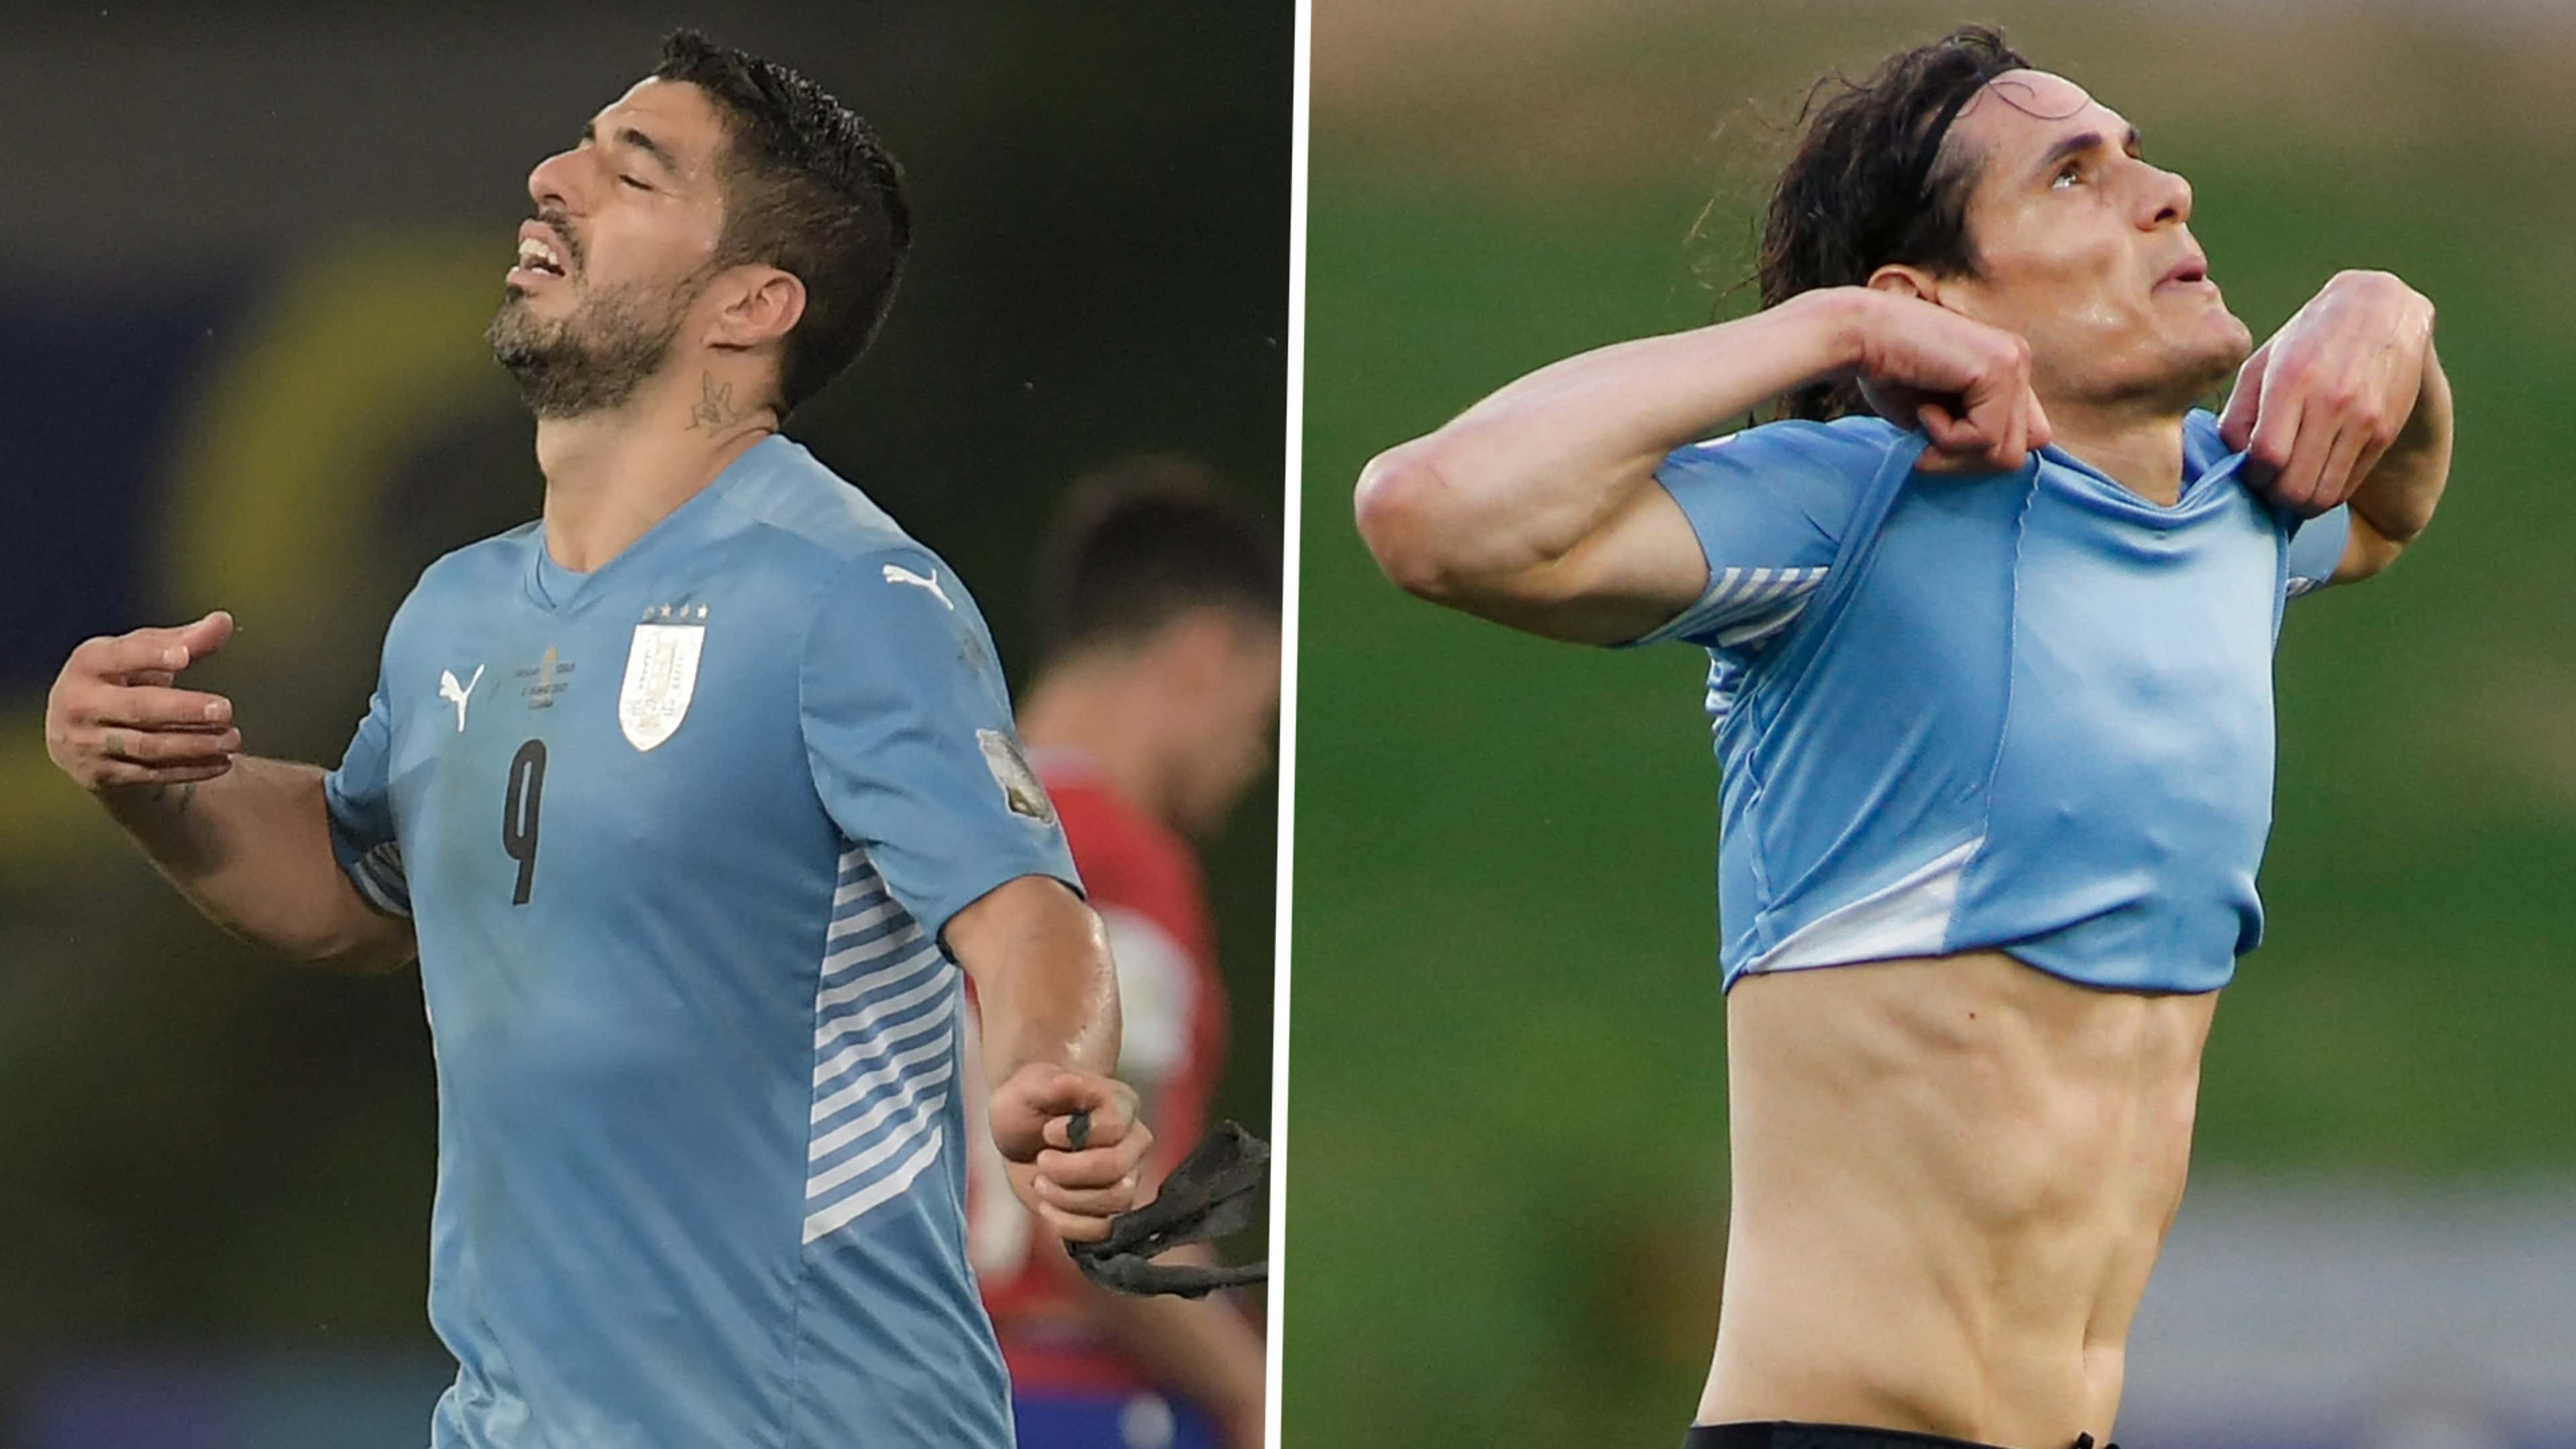 Suarez stars for Uruguay, leaving England all but out